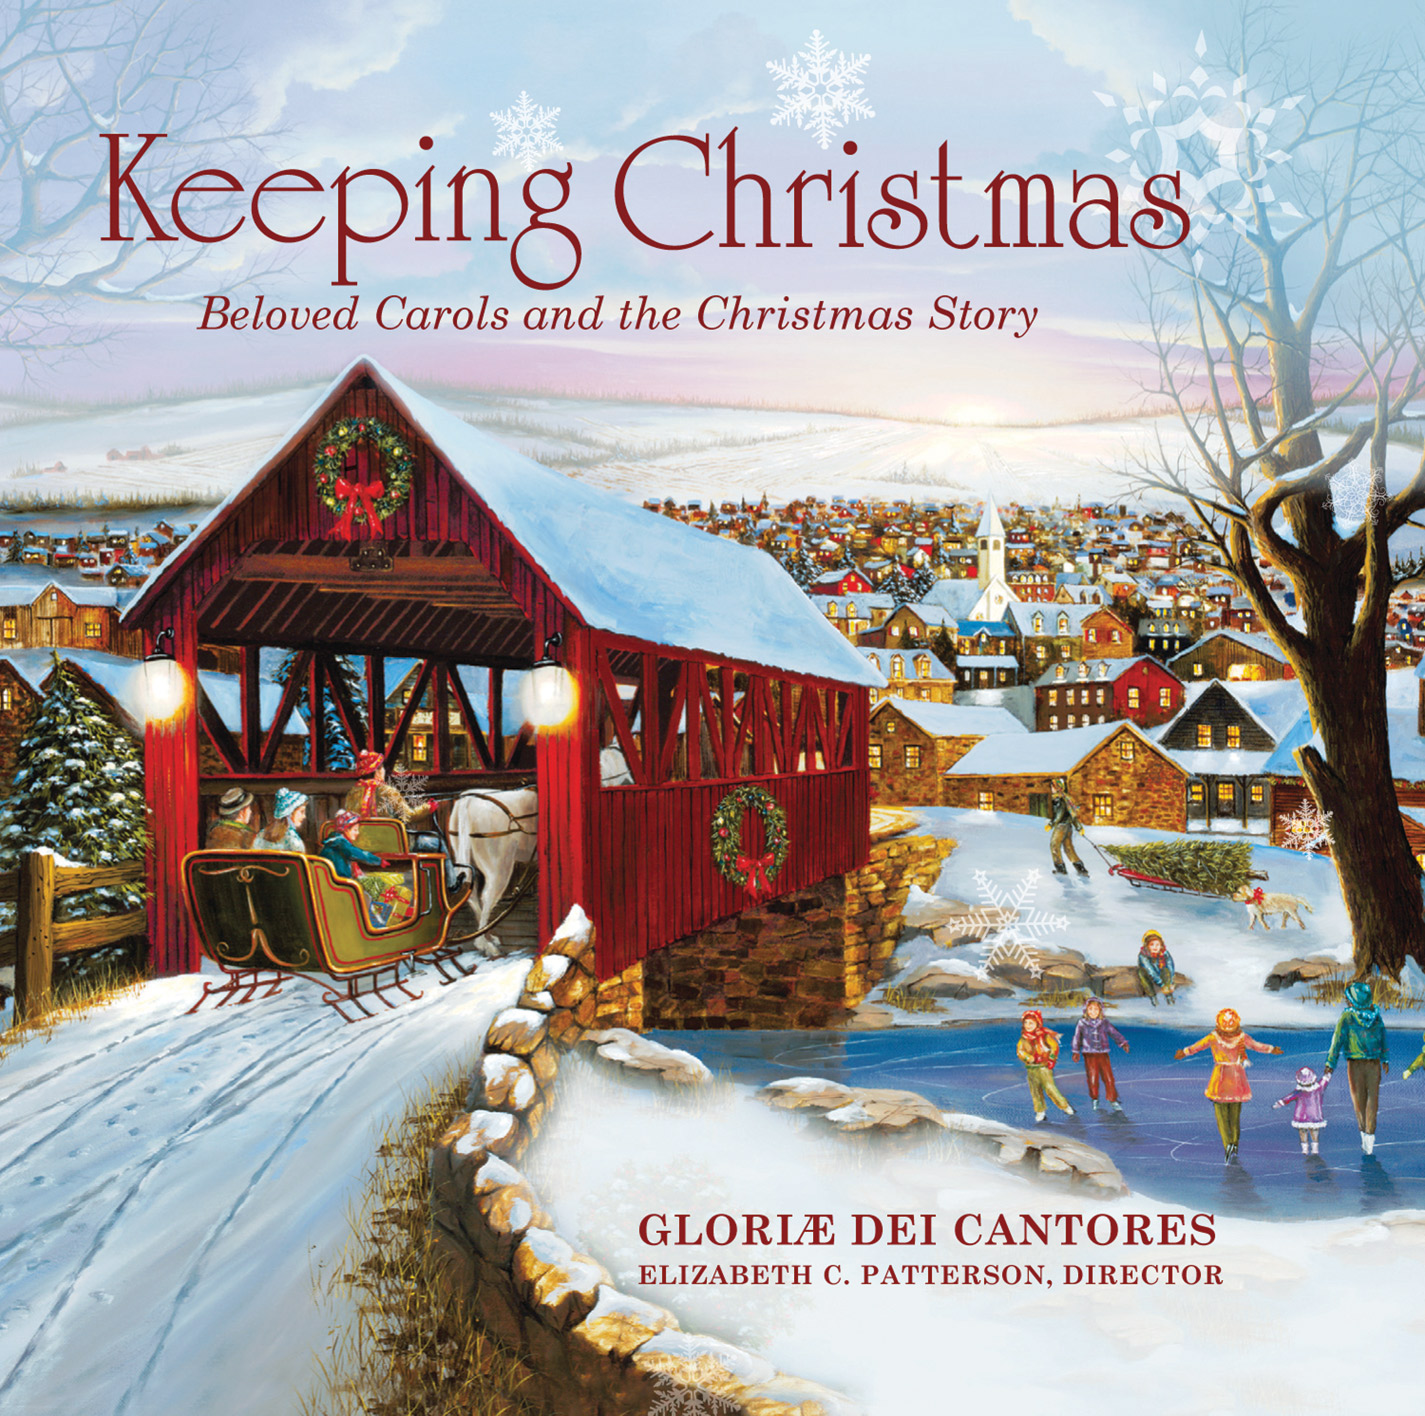 product image of 'Keeping Christmas' Gloriae Dei Cantores choral recording